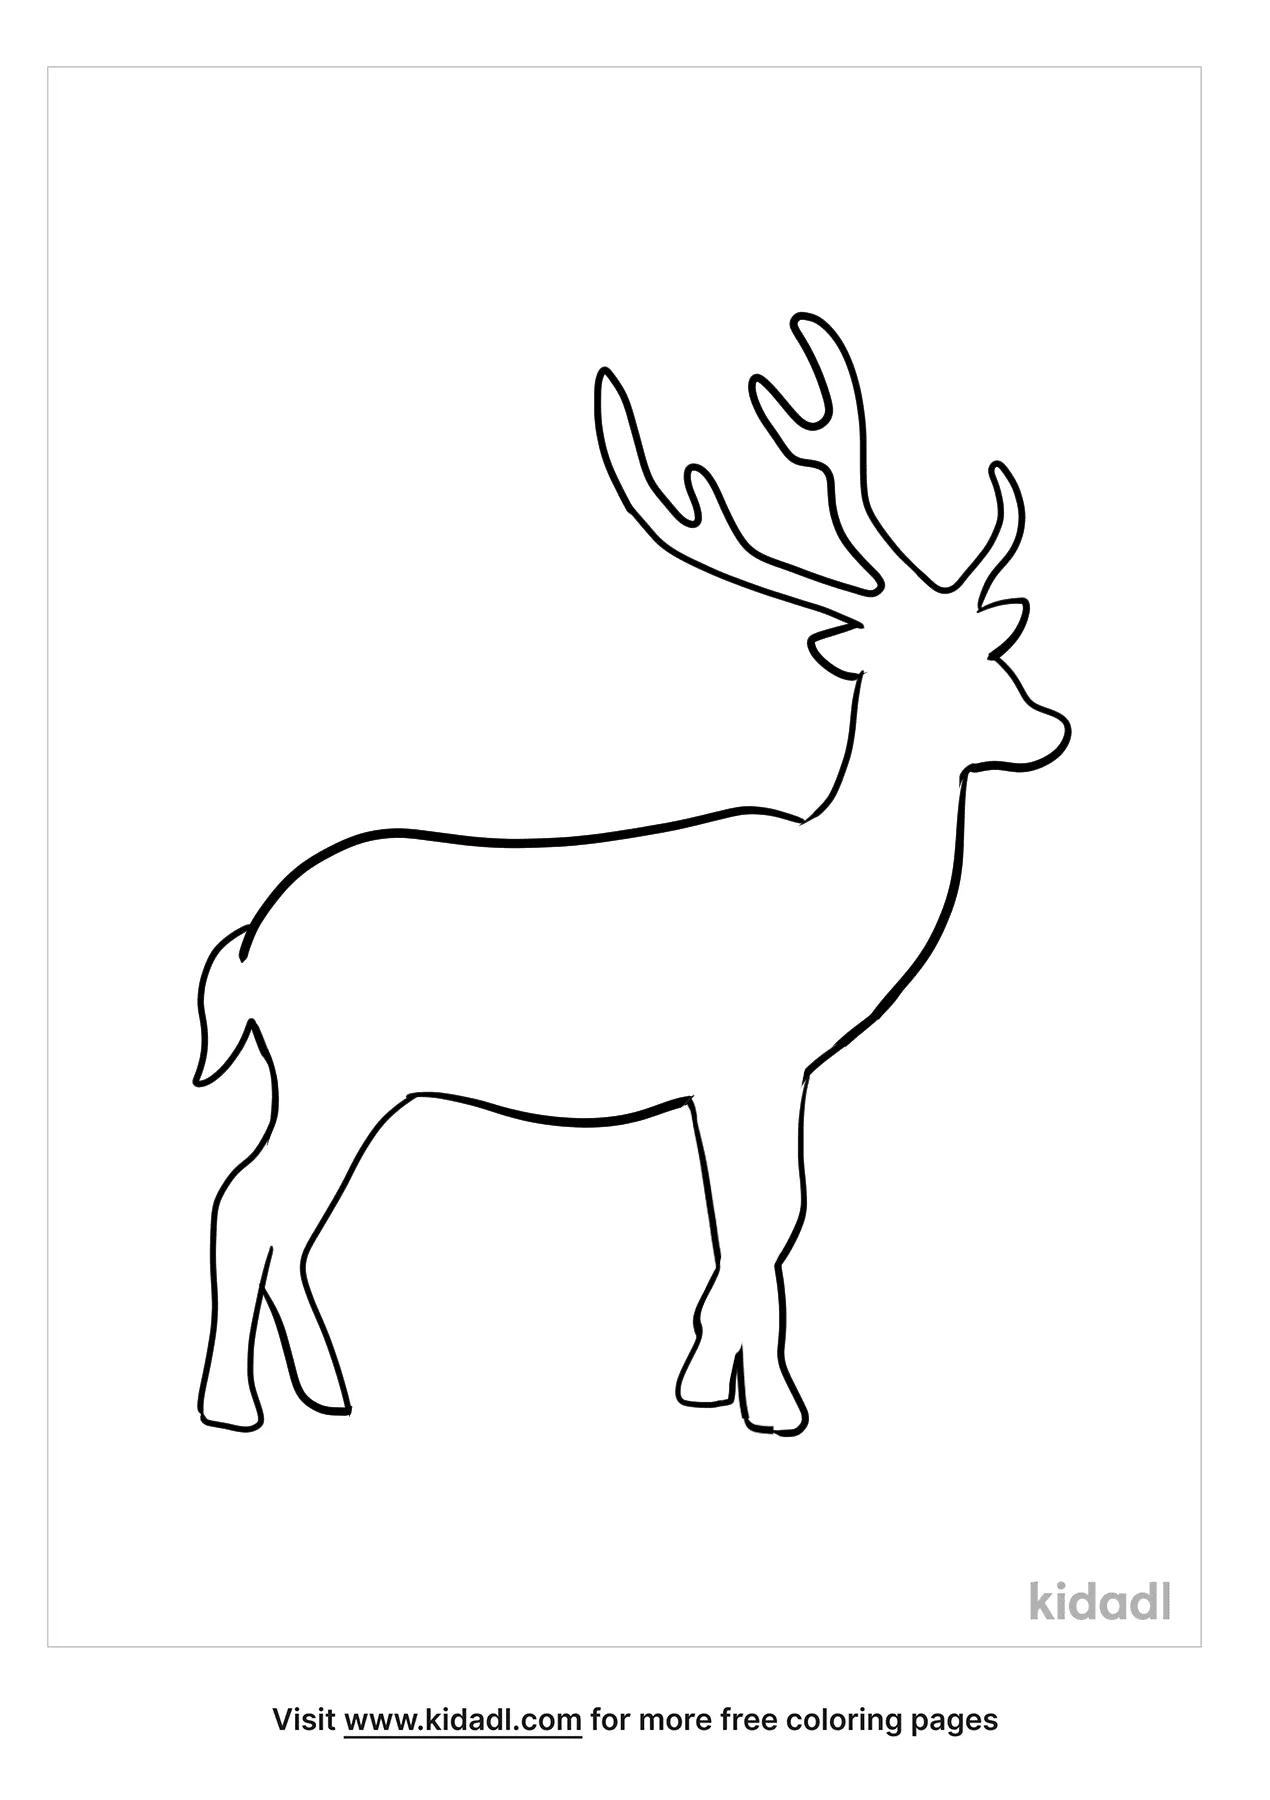 Free Animal Outline Coloring Page | Coloring Page Printables | Kidadl